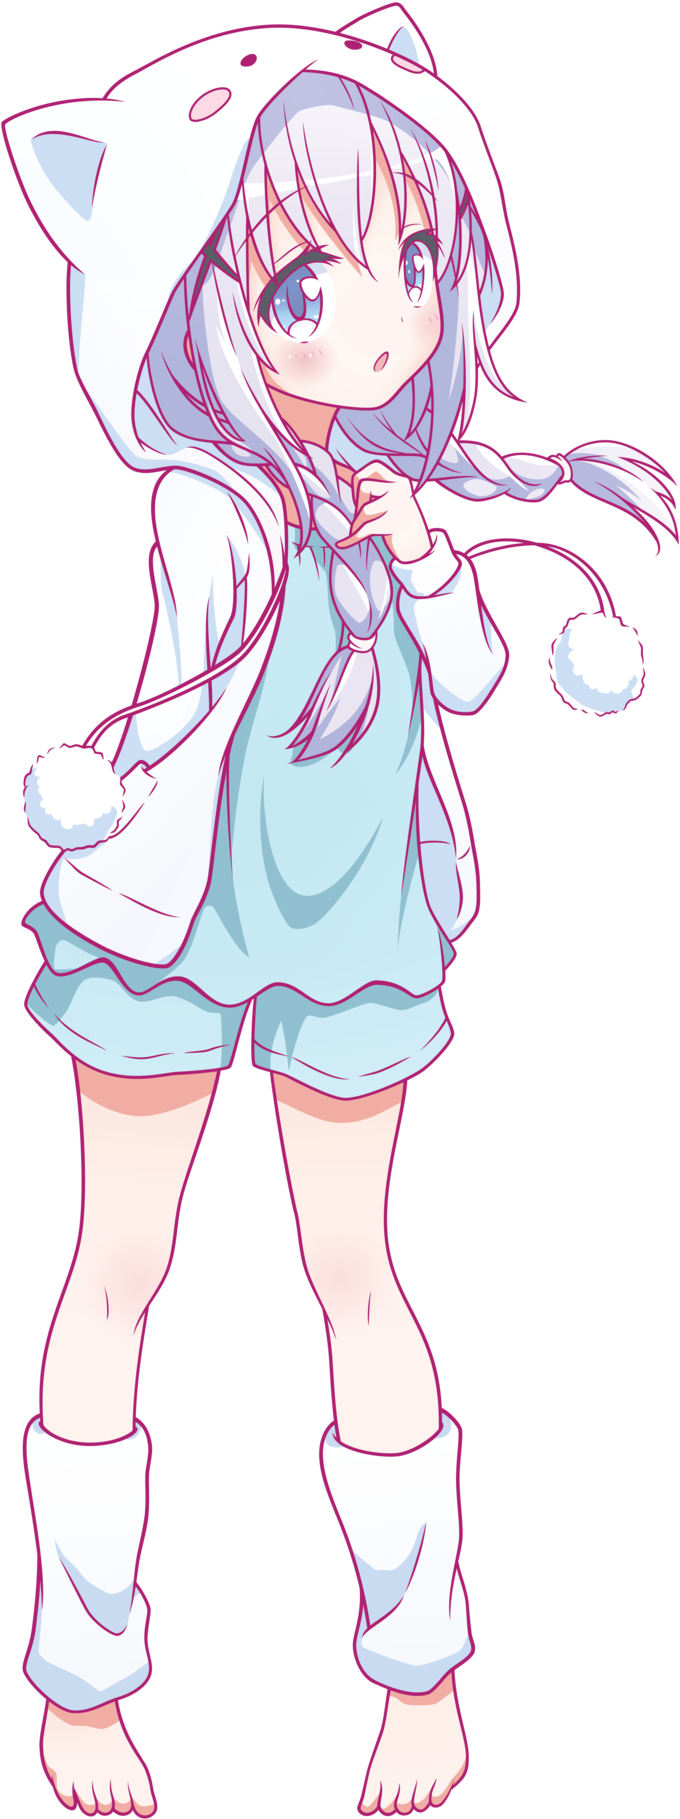 anime animeboy cute colorful handpainted acg  Anime Chibi Cute Boy  HD Png Download  Transparent Png Image  PNGitem